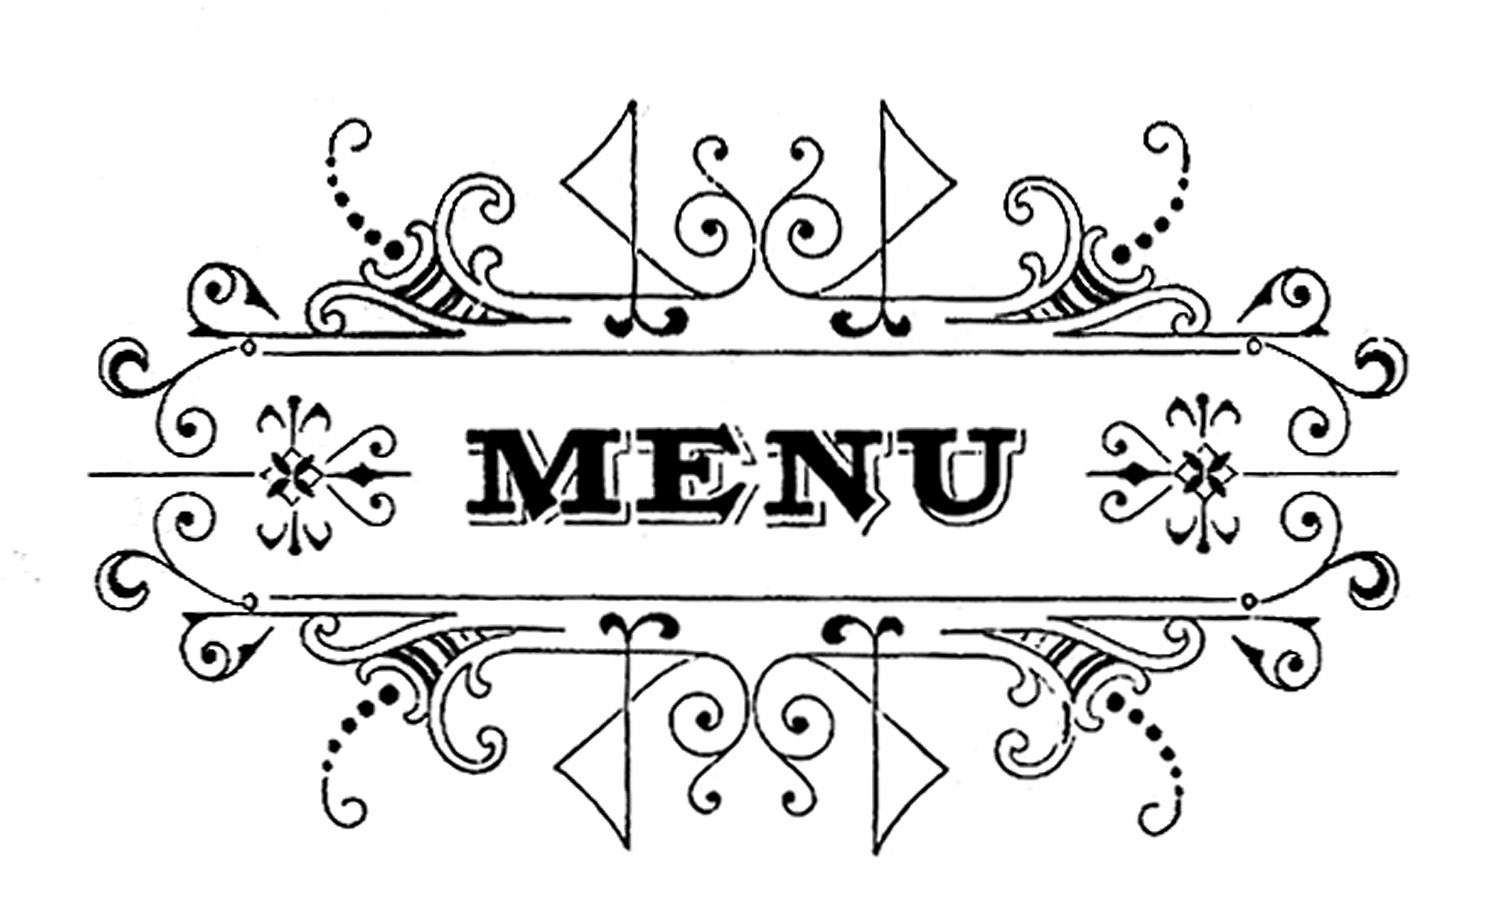 Stock Images   Typography   Frames   Wine   Menu   The Graphics Fairy